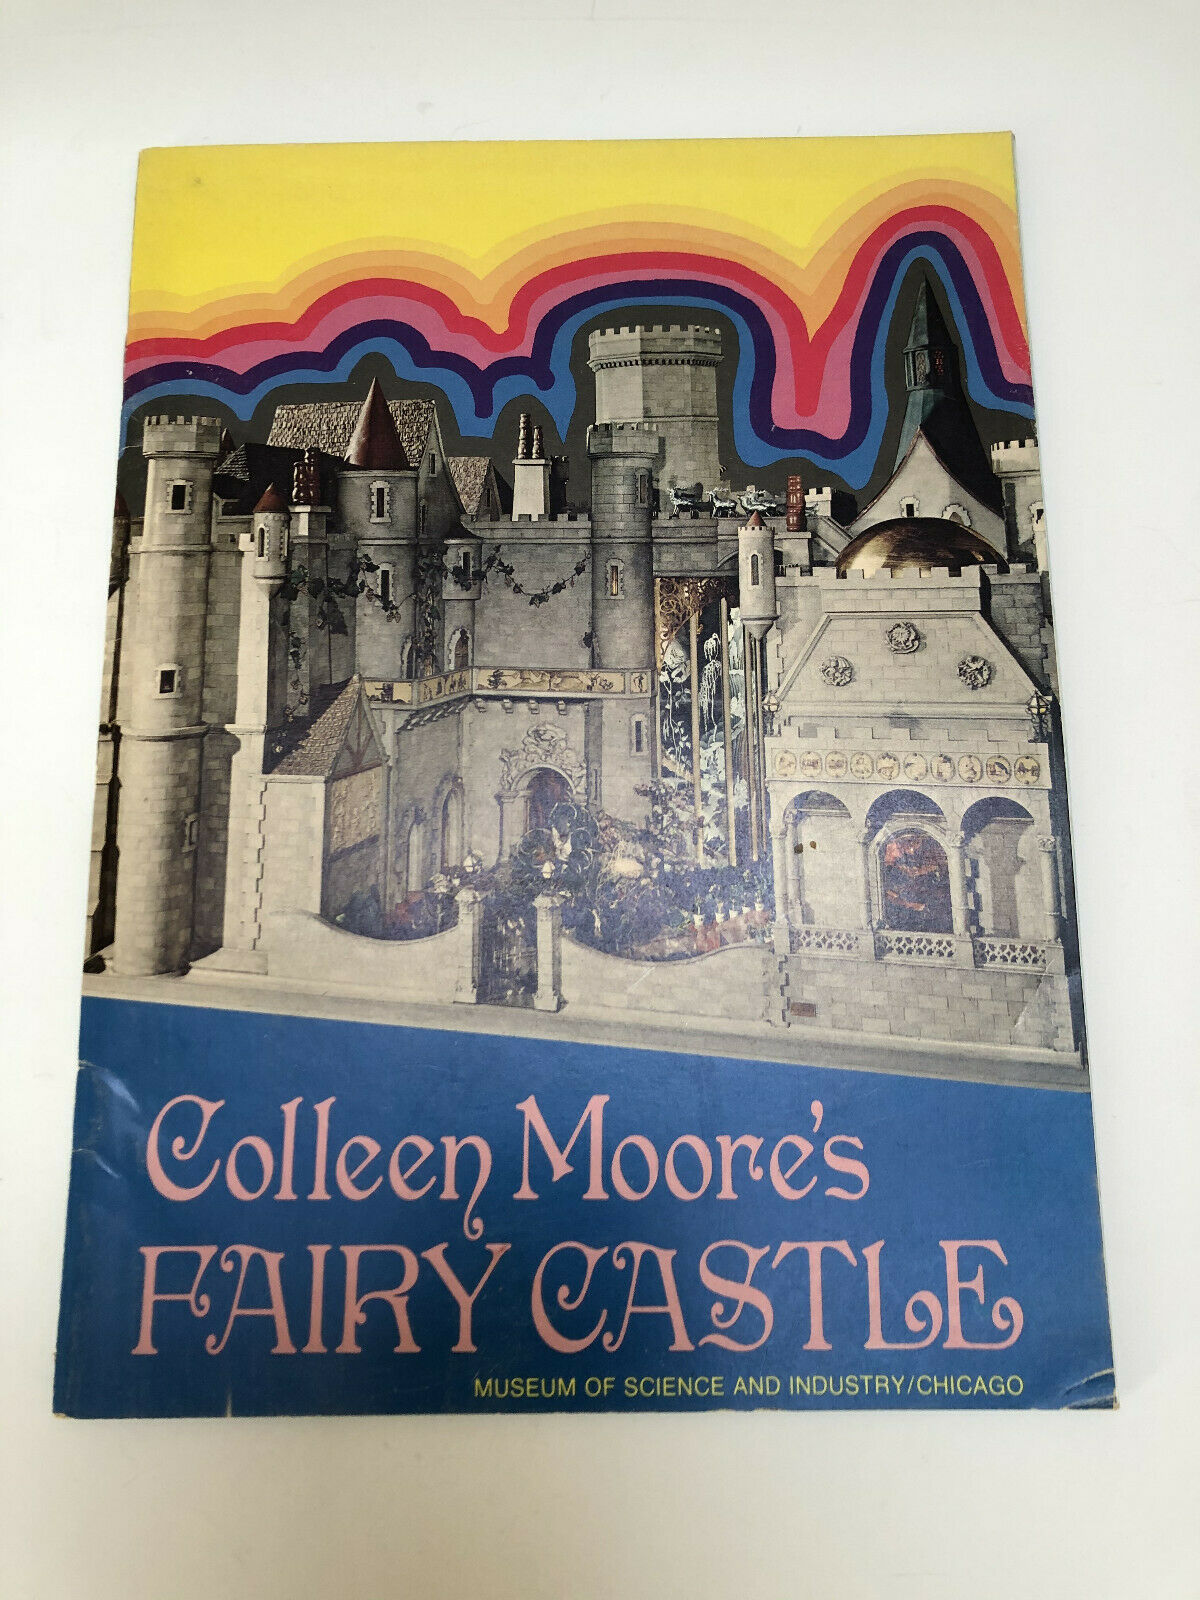 Colleen Moore's Fairy Castle Brochure Miniatures From Chicago Museum